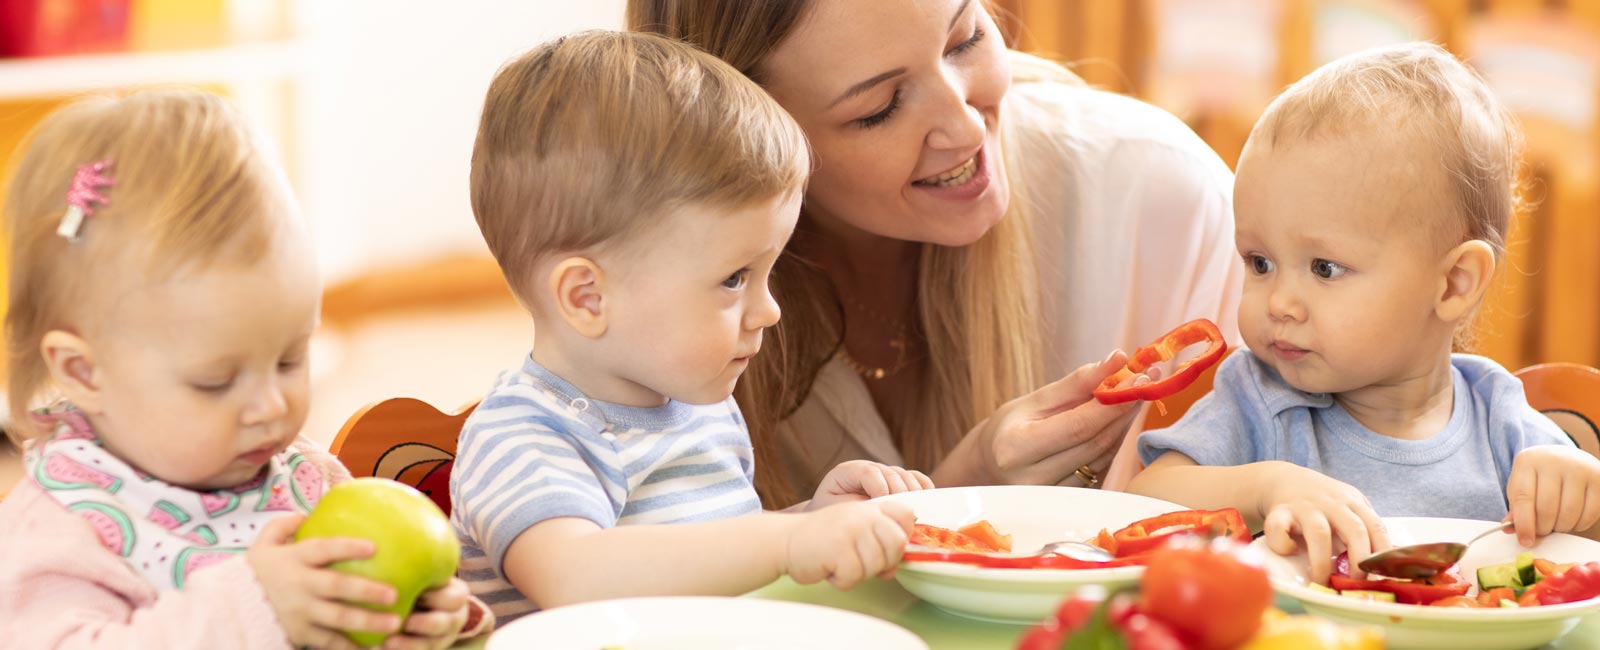 Only the best, most fresh ingredients are used in children's meals and snacks.